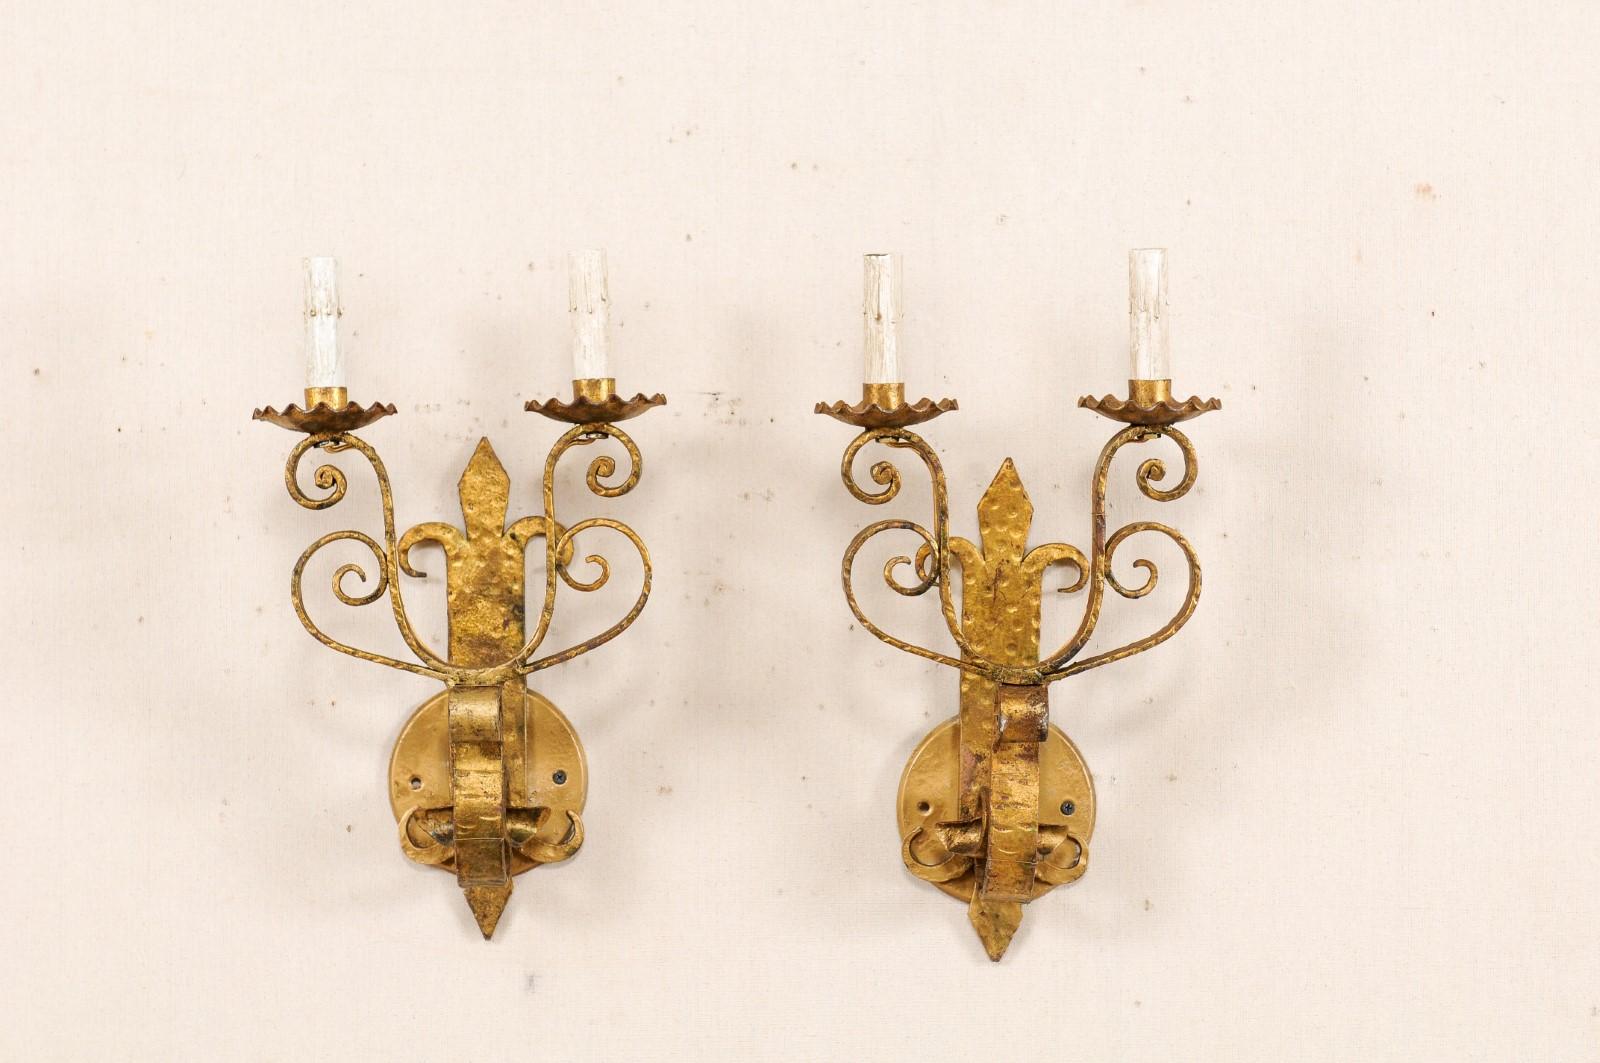 A pair of French two-light gold tone iron sconces from the mid-20th century. This vintage pair of French sconces each feature a vertically positioned and fleur-de-lys stylized back above a rounded back-plate. A thickly s-scrolled bar projects from